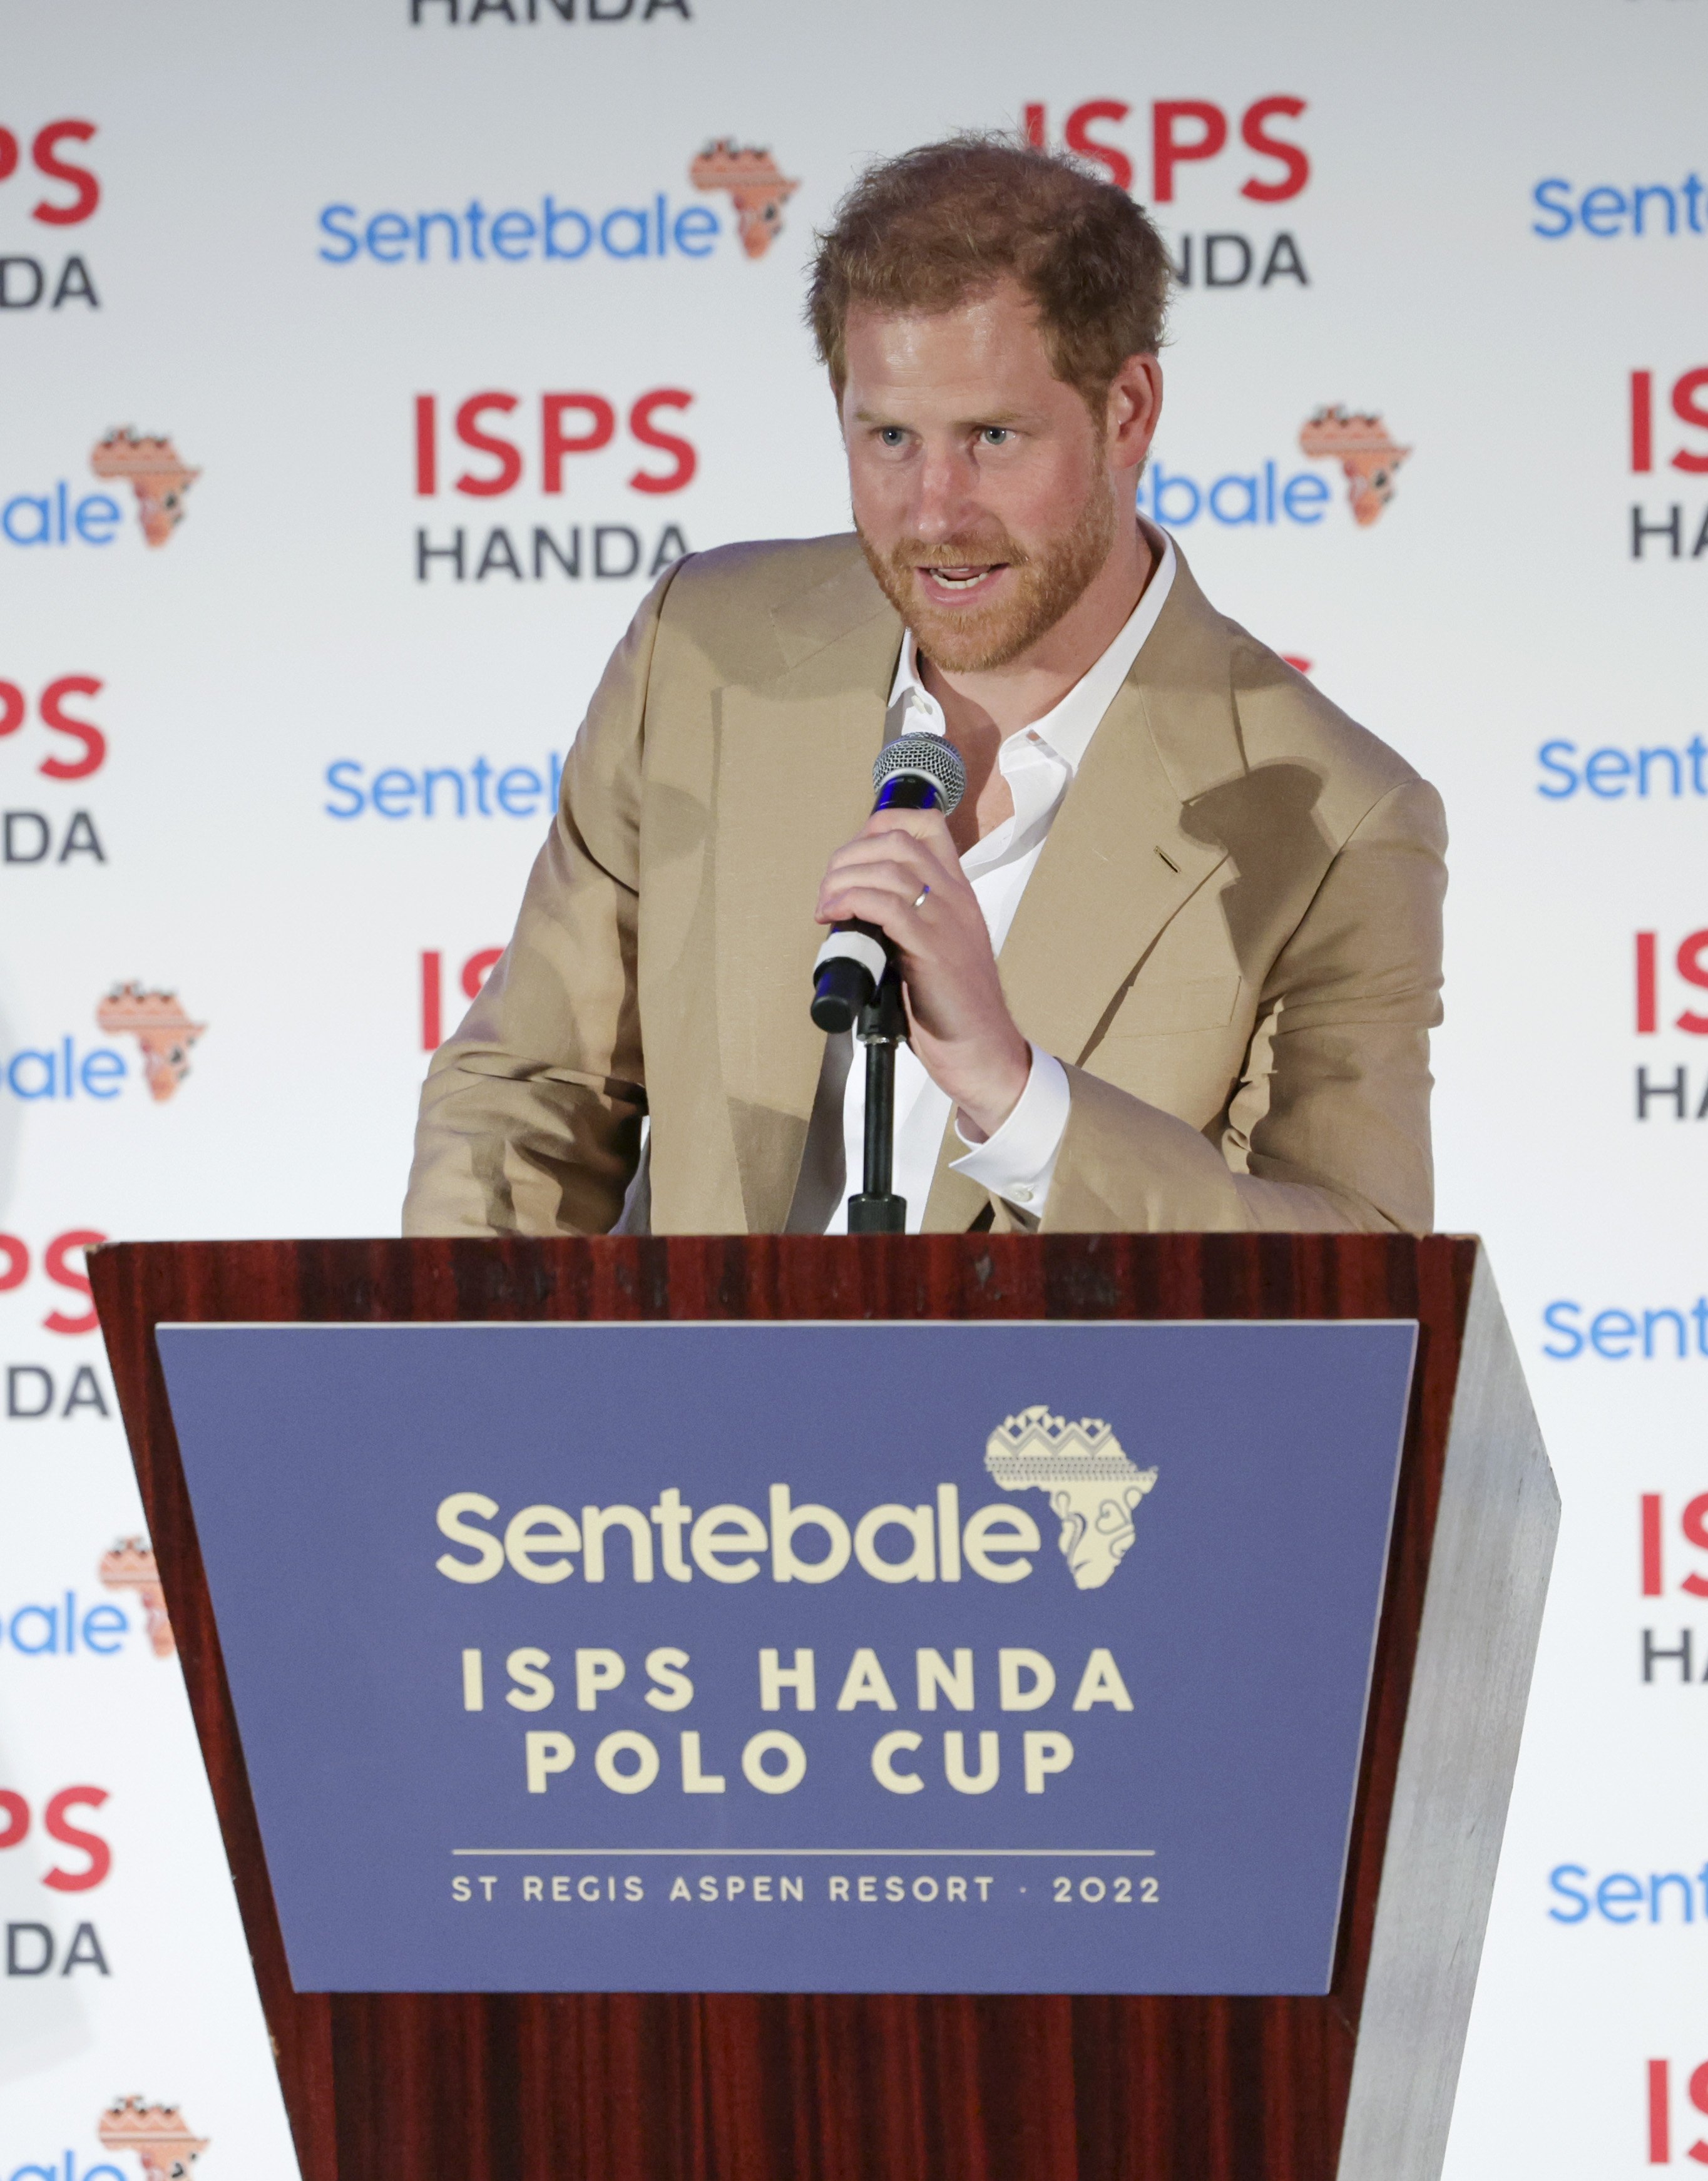 Prince Harry, Duke of Sussex, speaks at the Sentebale ISPS Handa Polo Cup 2022 on August 25, 2022, in Aspen, Colorado. | Source: Getty Images